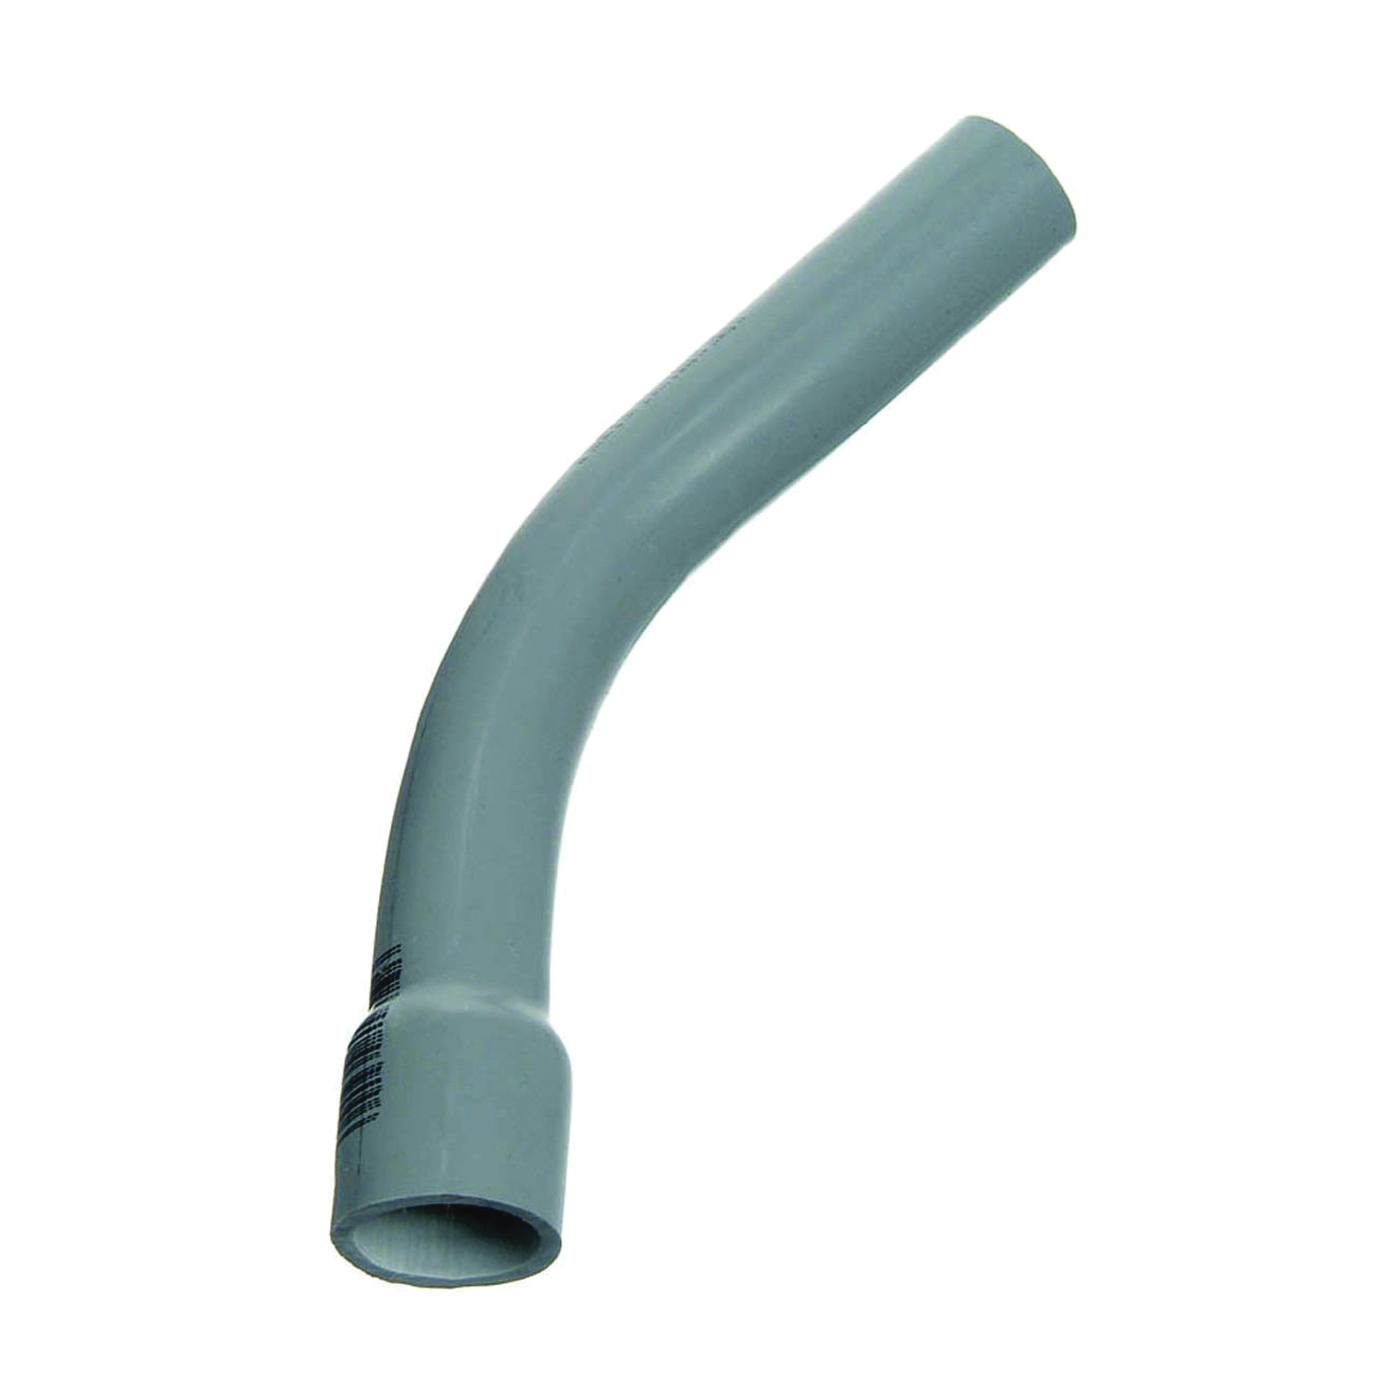 UA7AGB-CAR Elbow, 1-1/4 in Trade Size, 45 deg Angle, SCH 40 Schedule Rating, PVC, Plain End, Gray